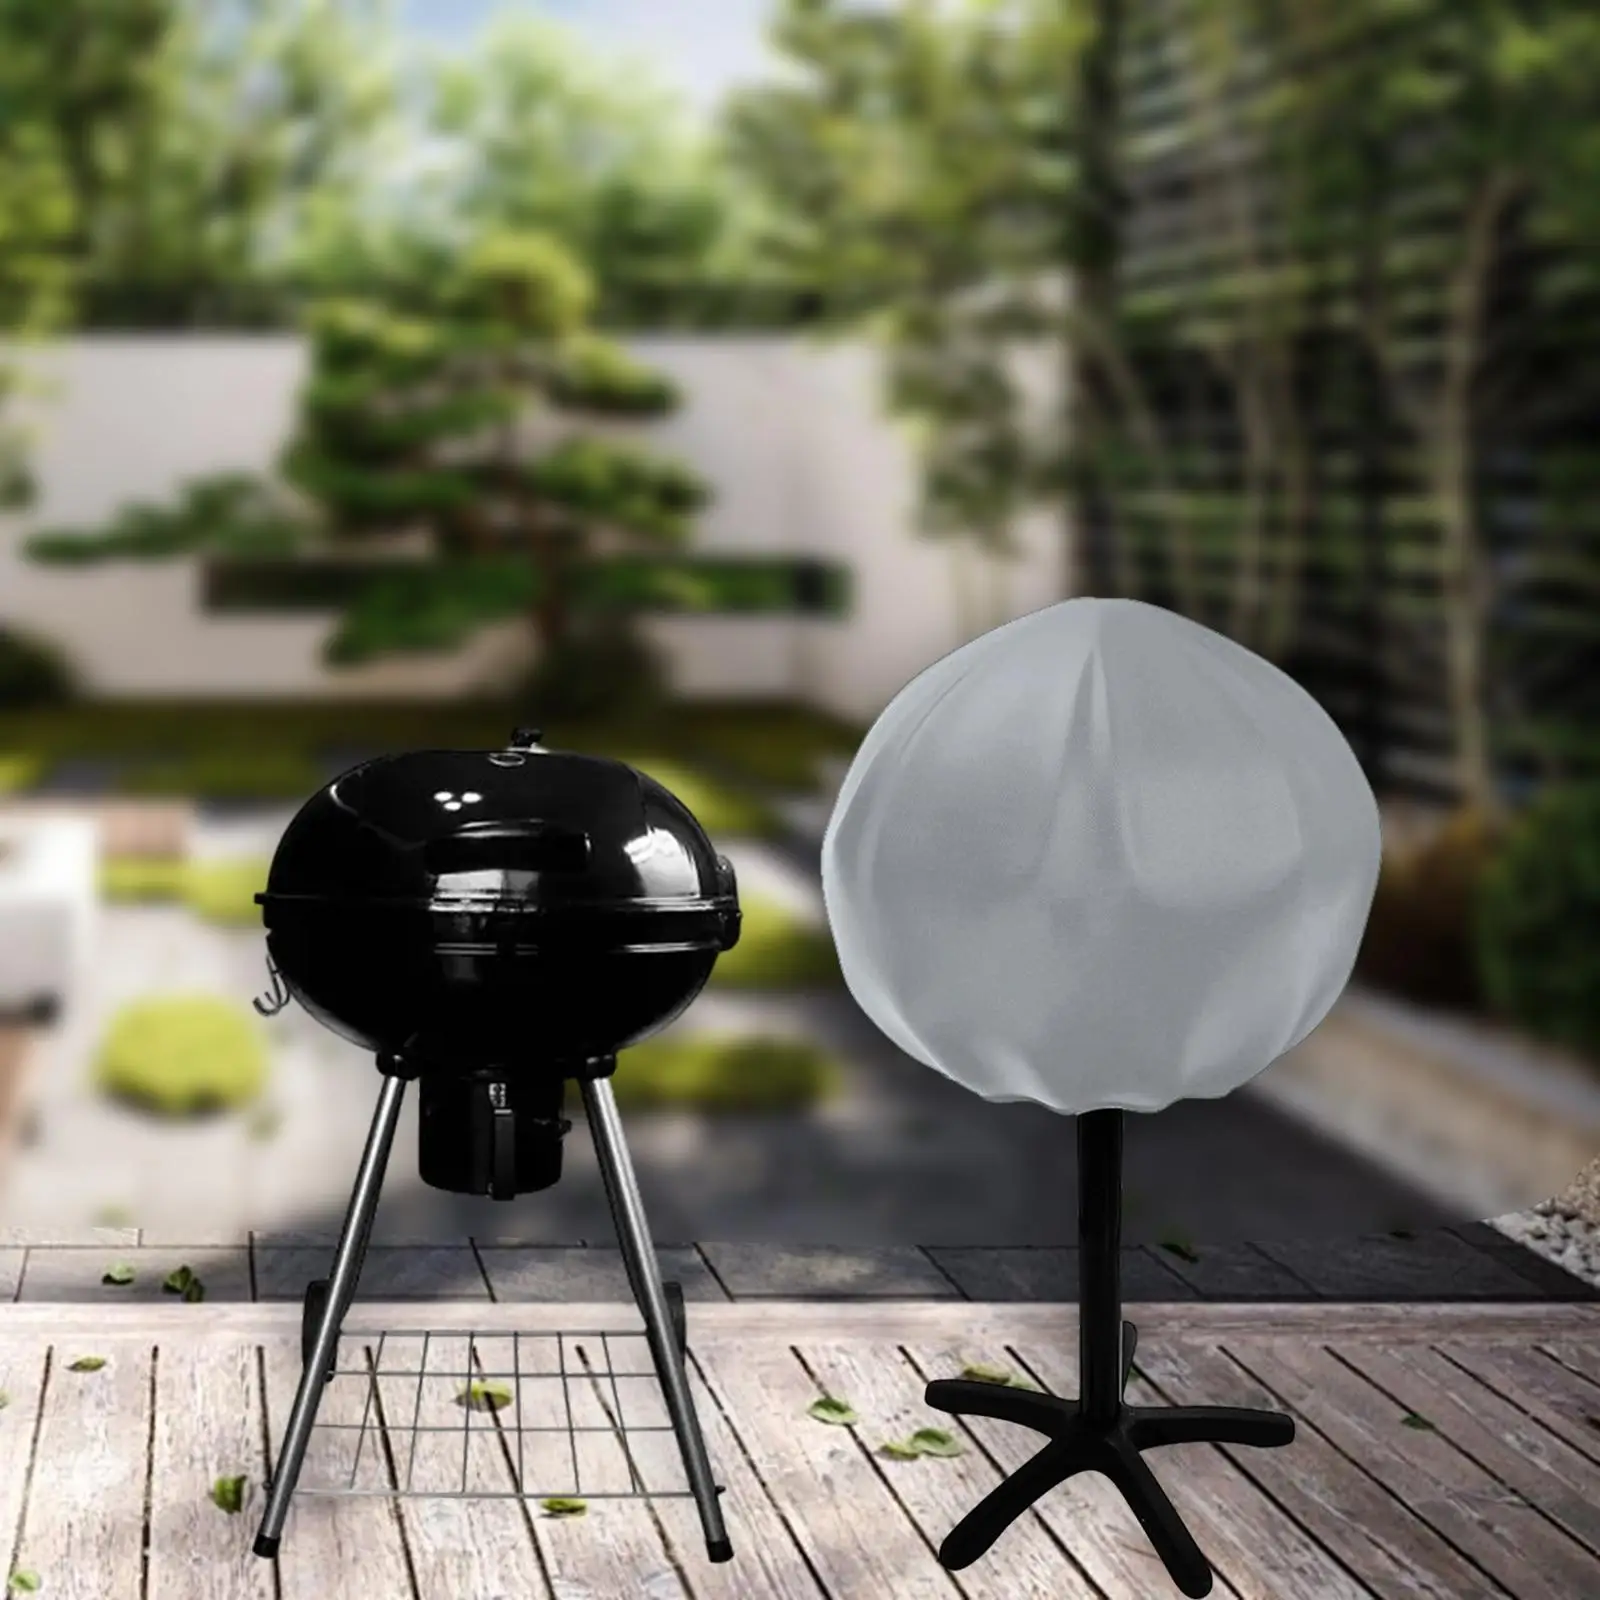 Vertical Round Grills Cover Barbecue Accessory Vertical Smoker Cover Dustproof Drawstring Waterproof for Garden Patio Outdoor